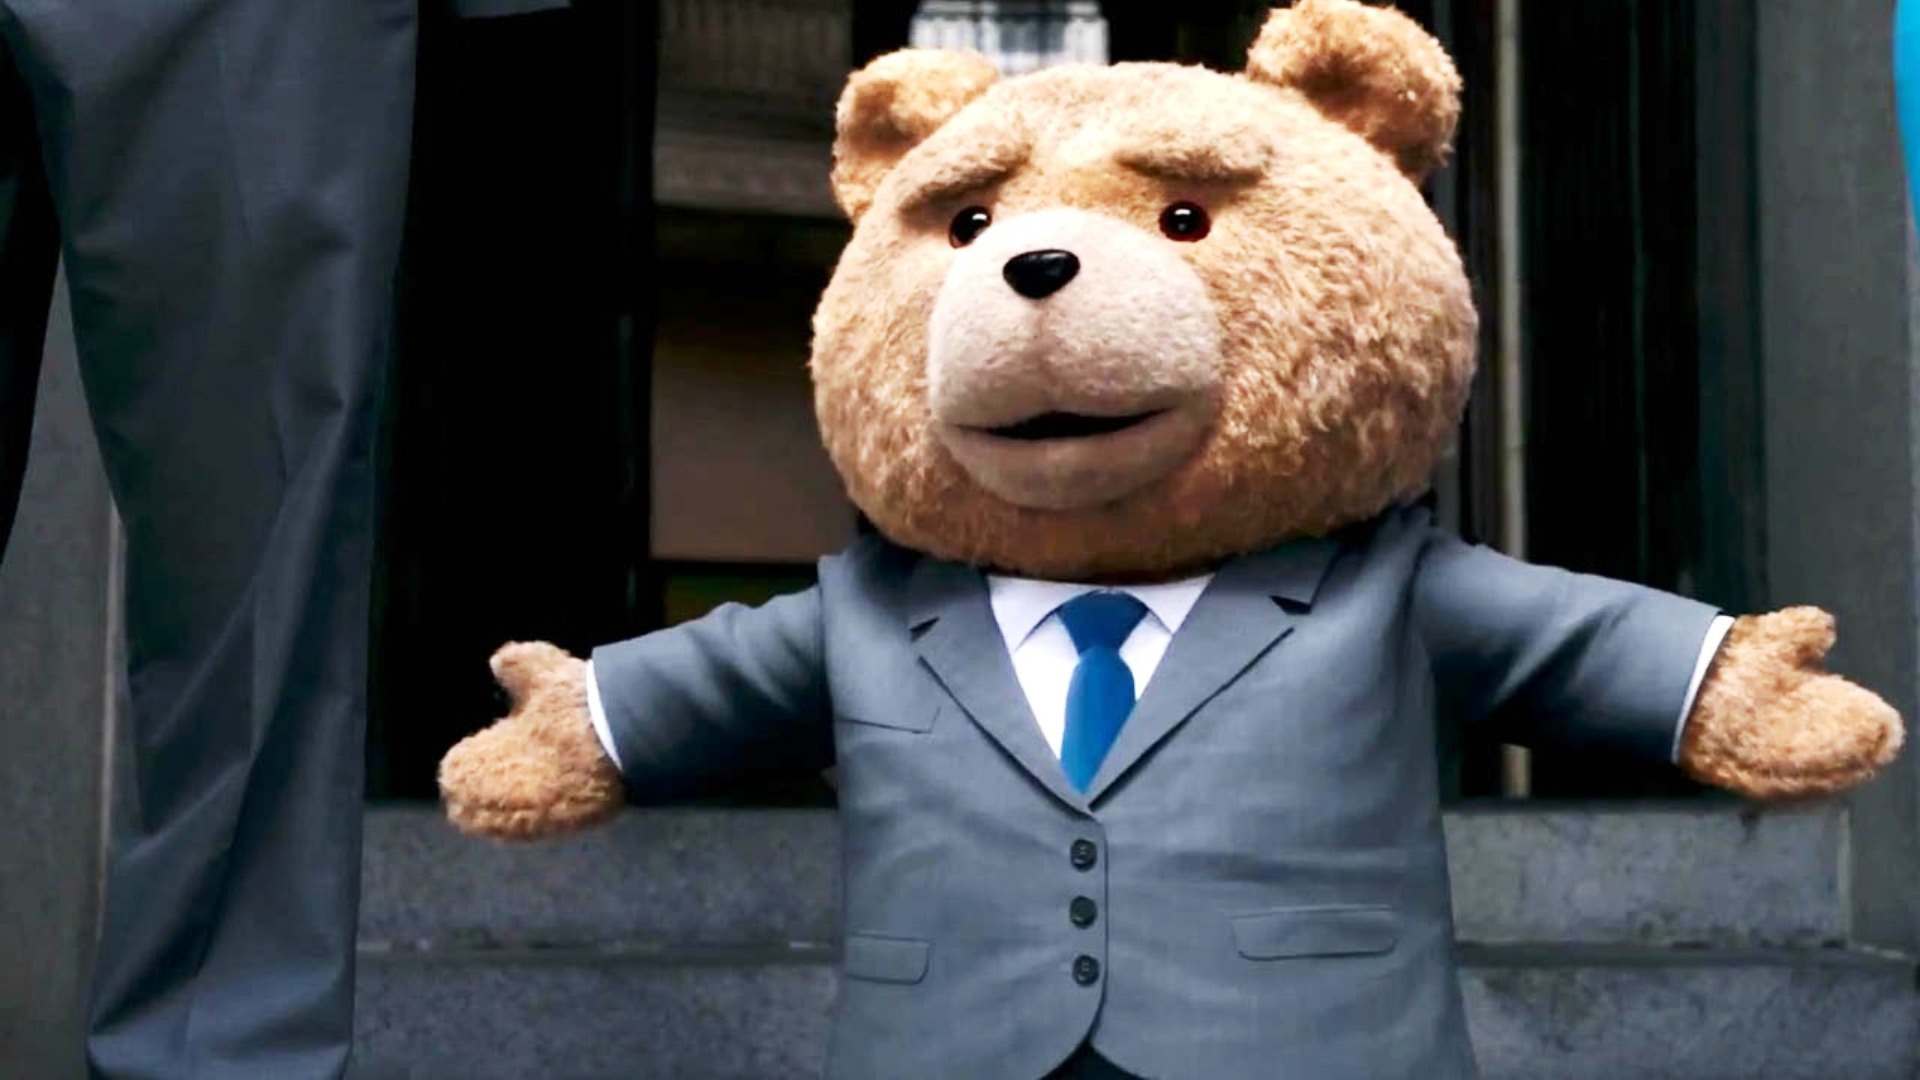 Ted Pics, Movie Collection